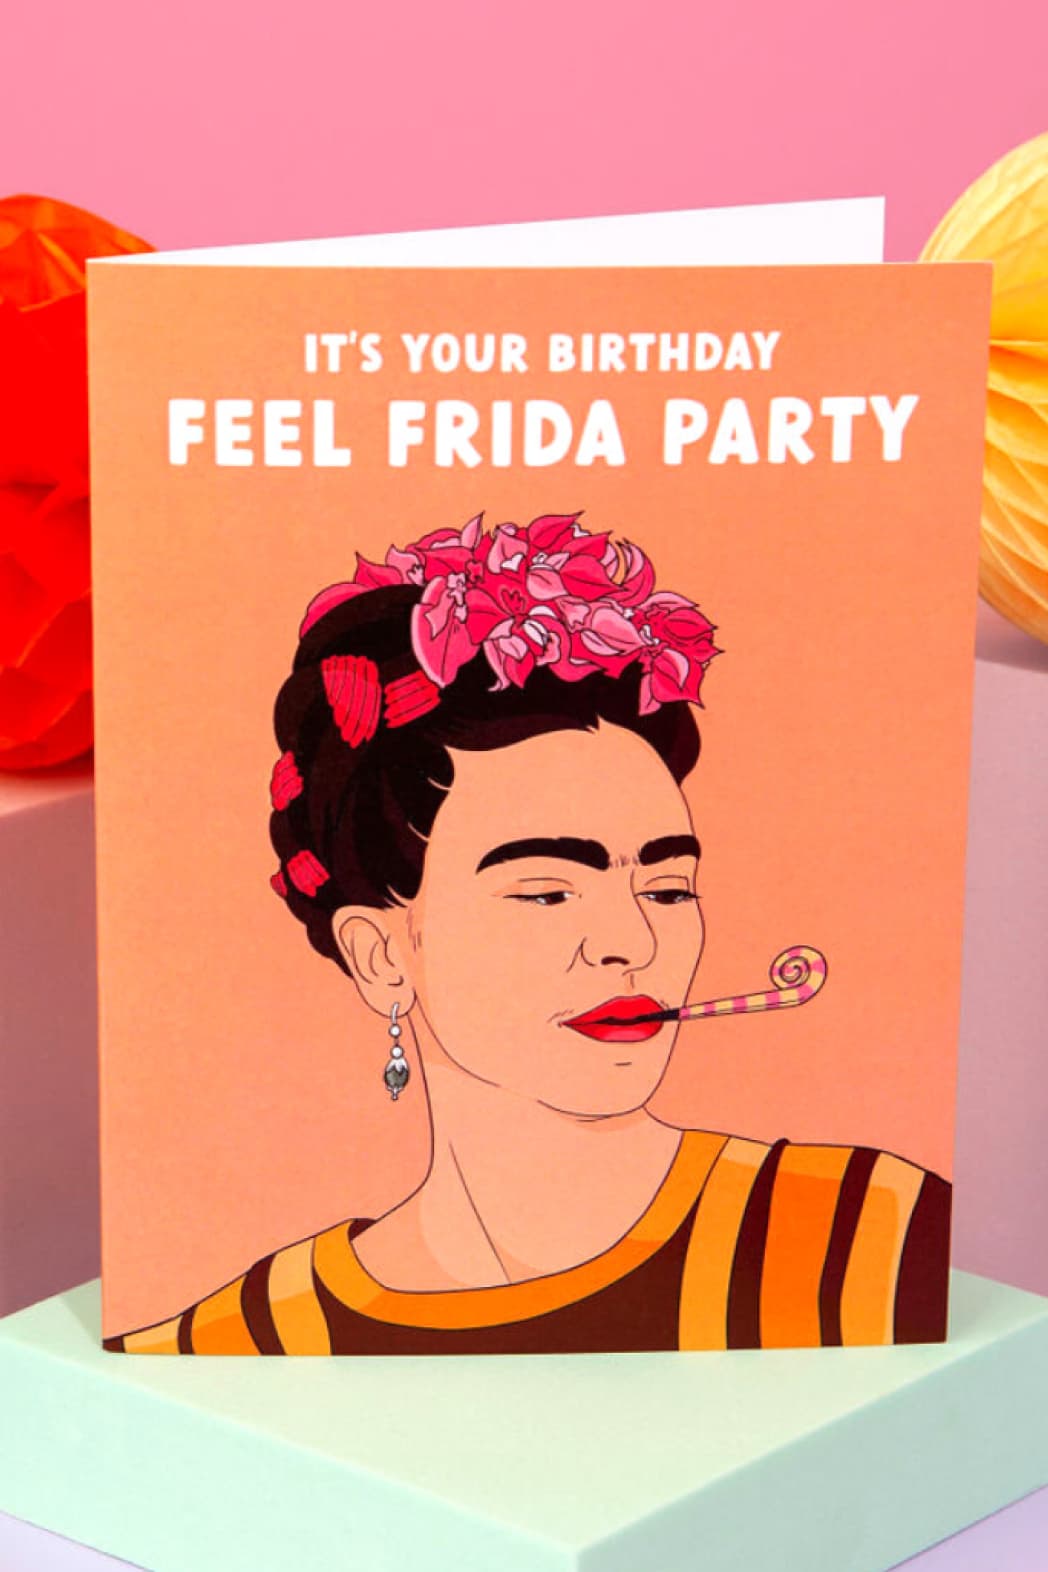 "Feel Frida Party" Birthday Card - Greeting & Note Cards